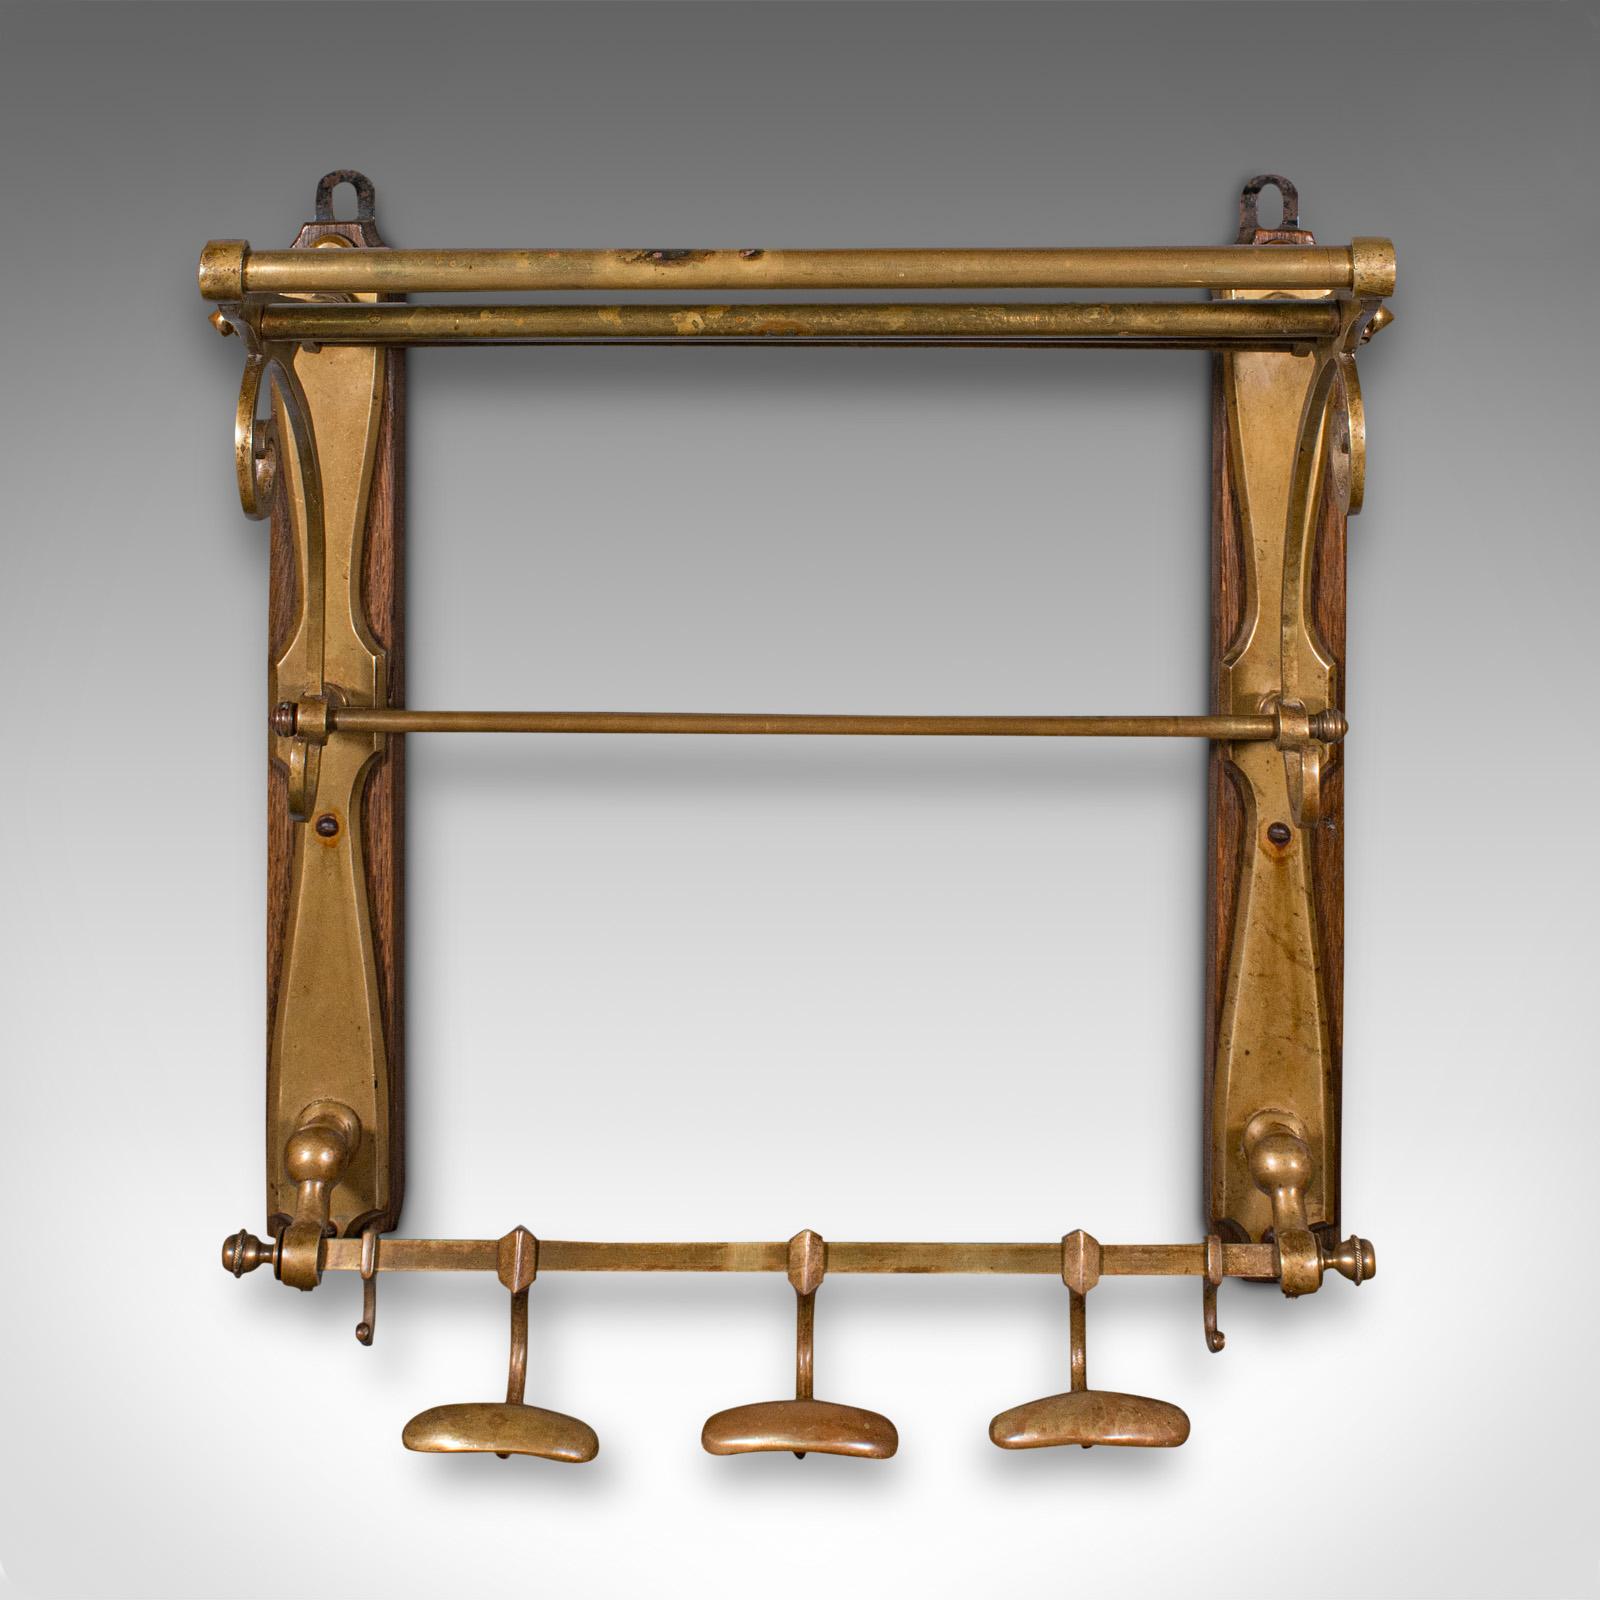 This is an antique gentleman's club valet. A French, brass and oak reception hall rack, dating to the Victorian period, circa 1870.

Graced with elegant forms and quality fittings, perfect for a grand entrance
Displays a desirable aged patina and in